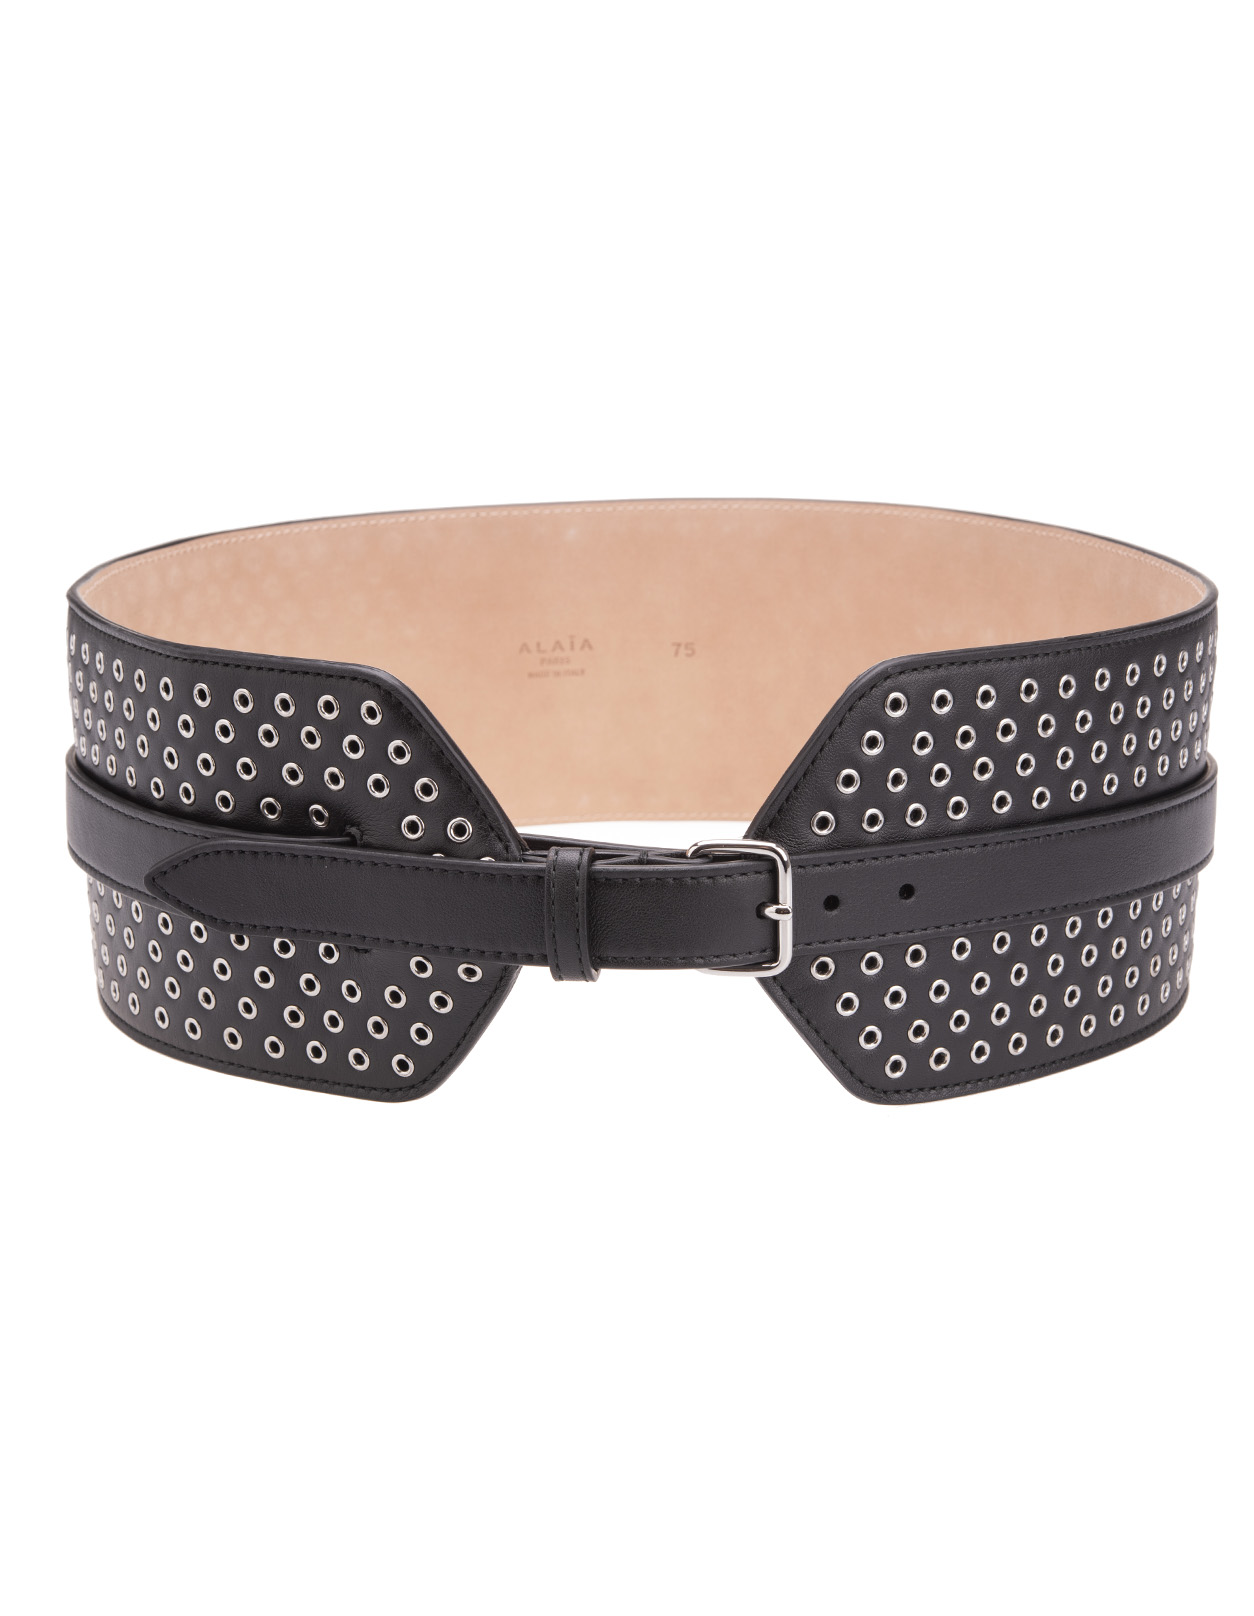 Corset Belt In Black Perforated Leather With Studs - ALAIA - Russocapri